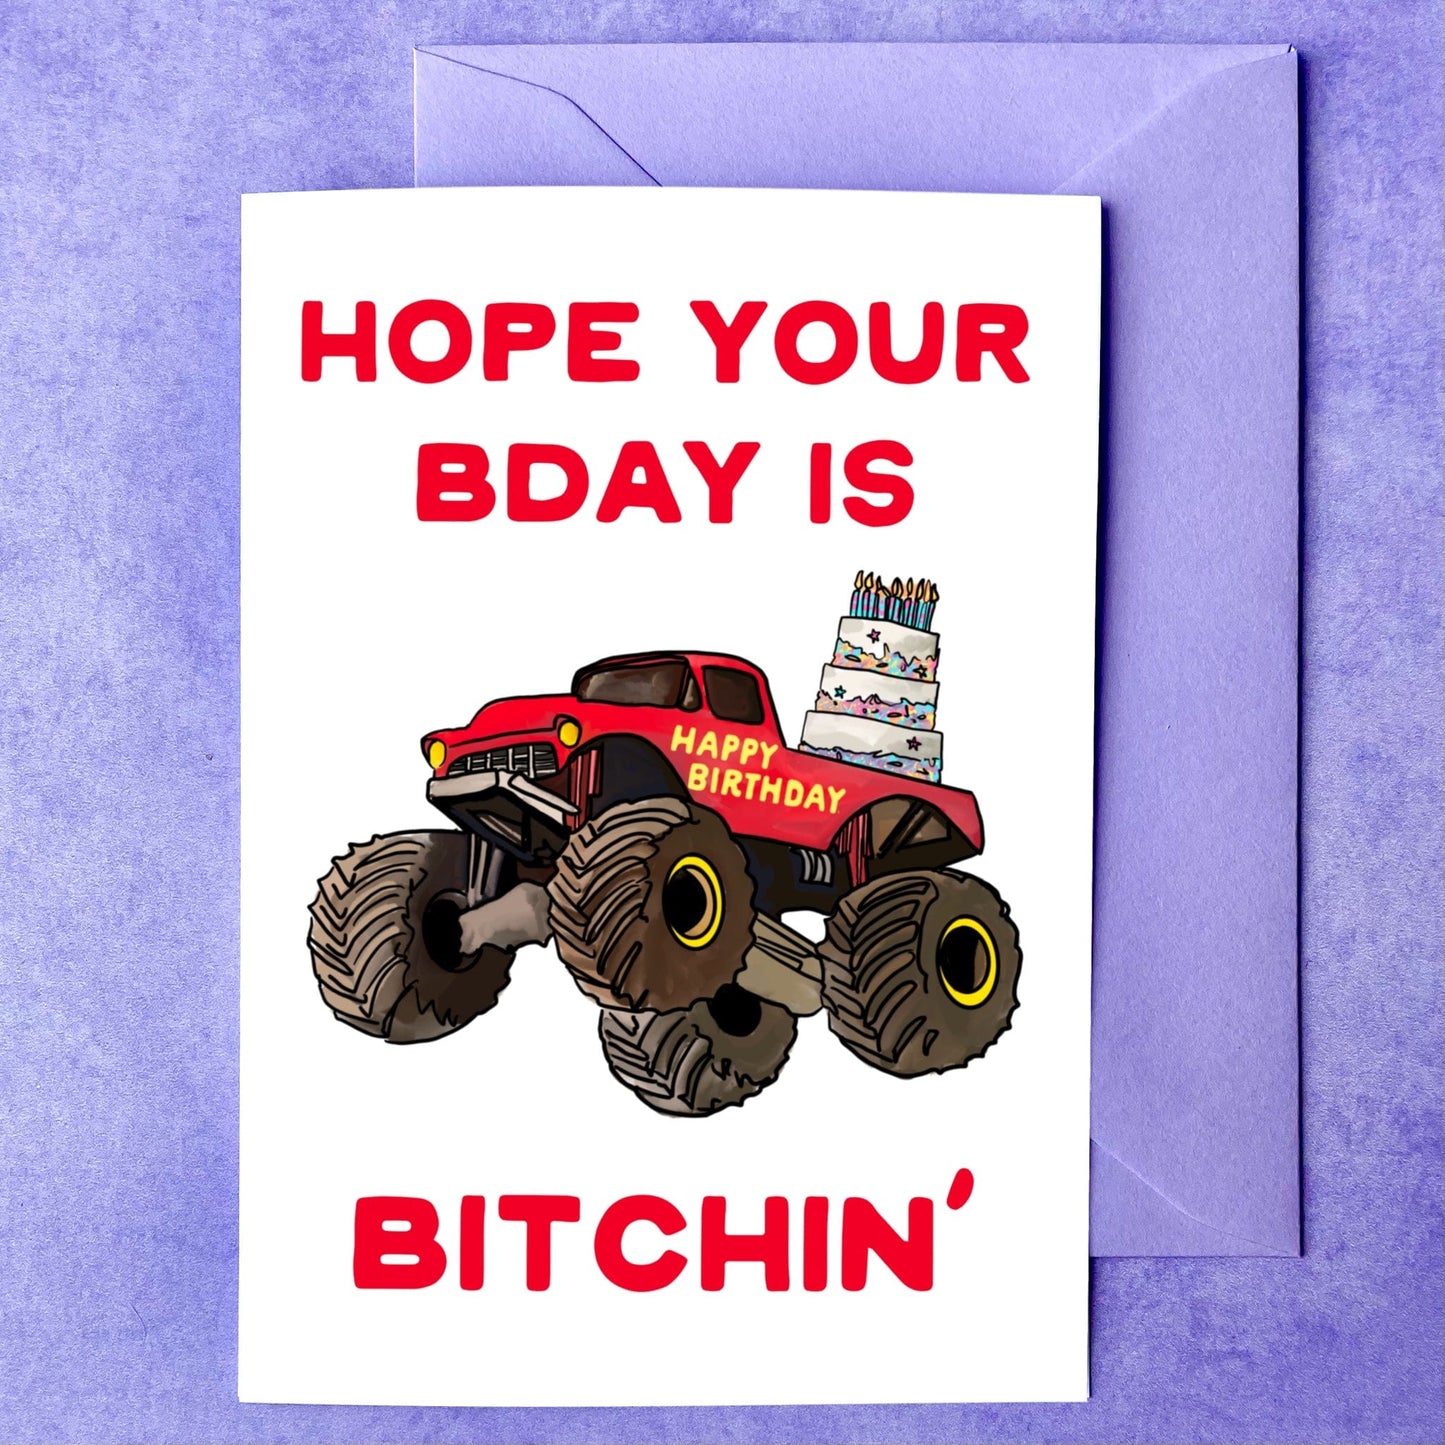 Maker Scholar Hope your bday is bitchin’ | Birthday Card